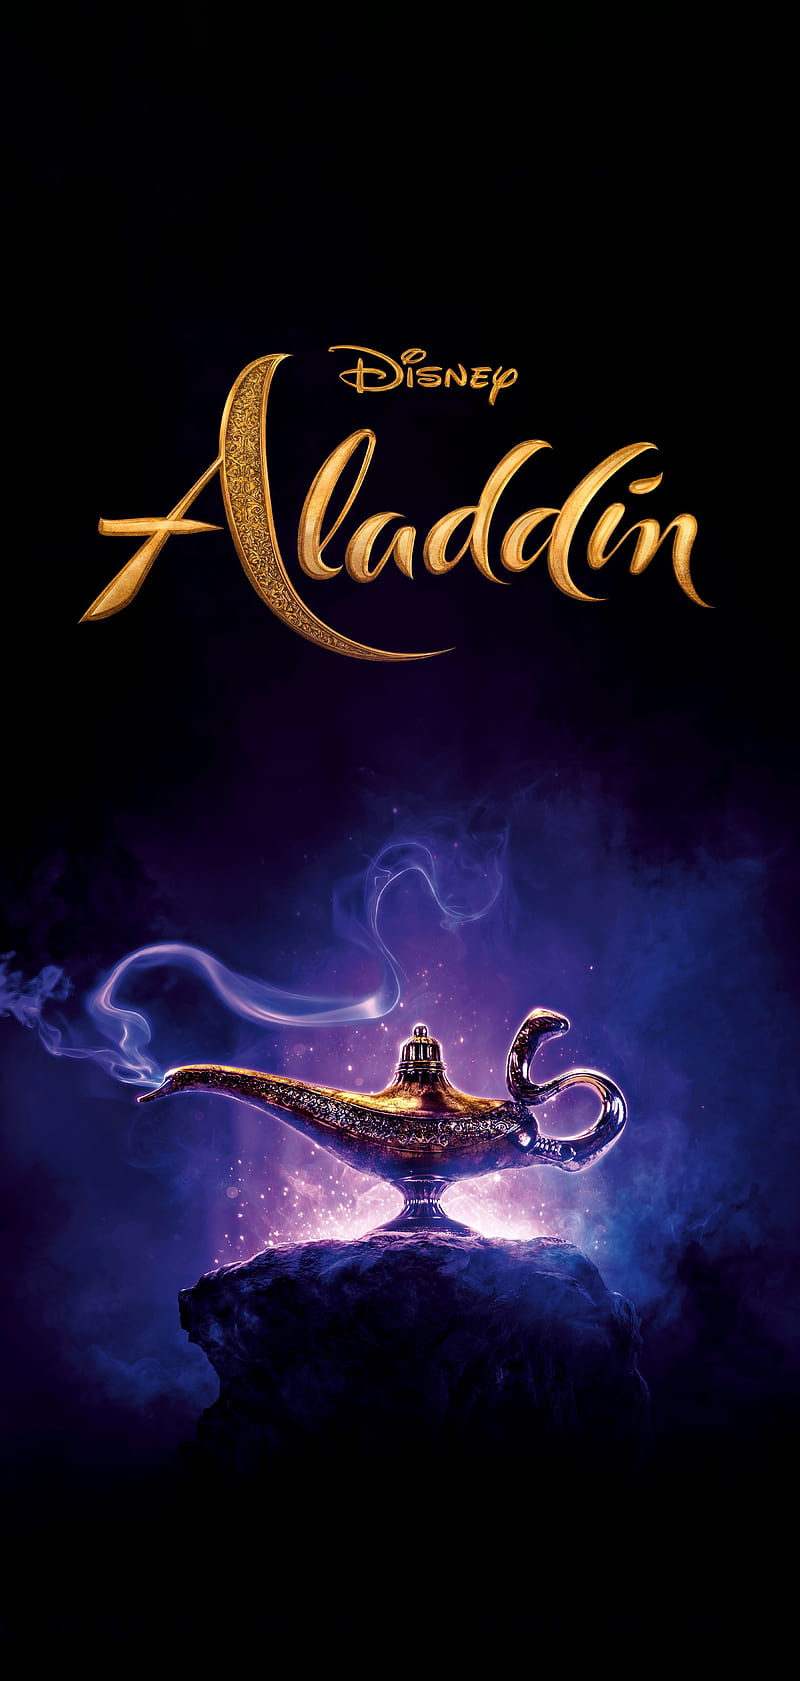 Cartoonish and artistic HD wallpapers of Aladdin 2019 movie  YouLoveItcom